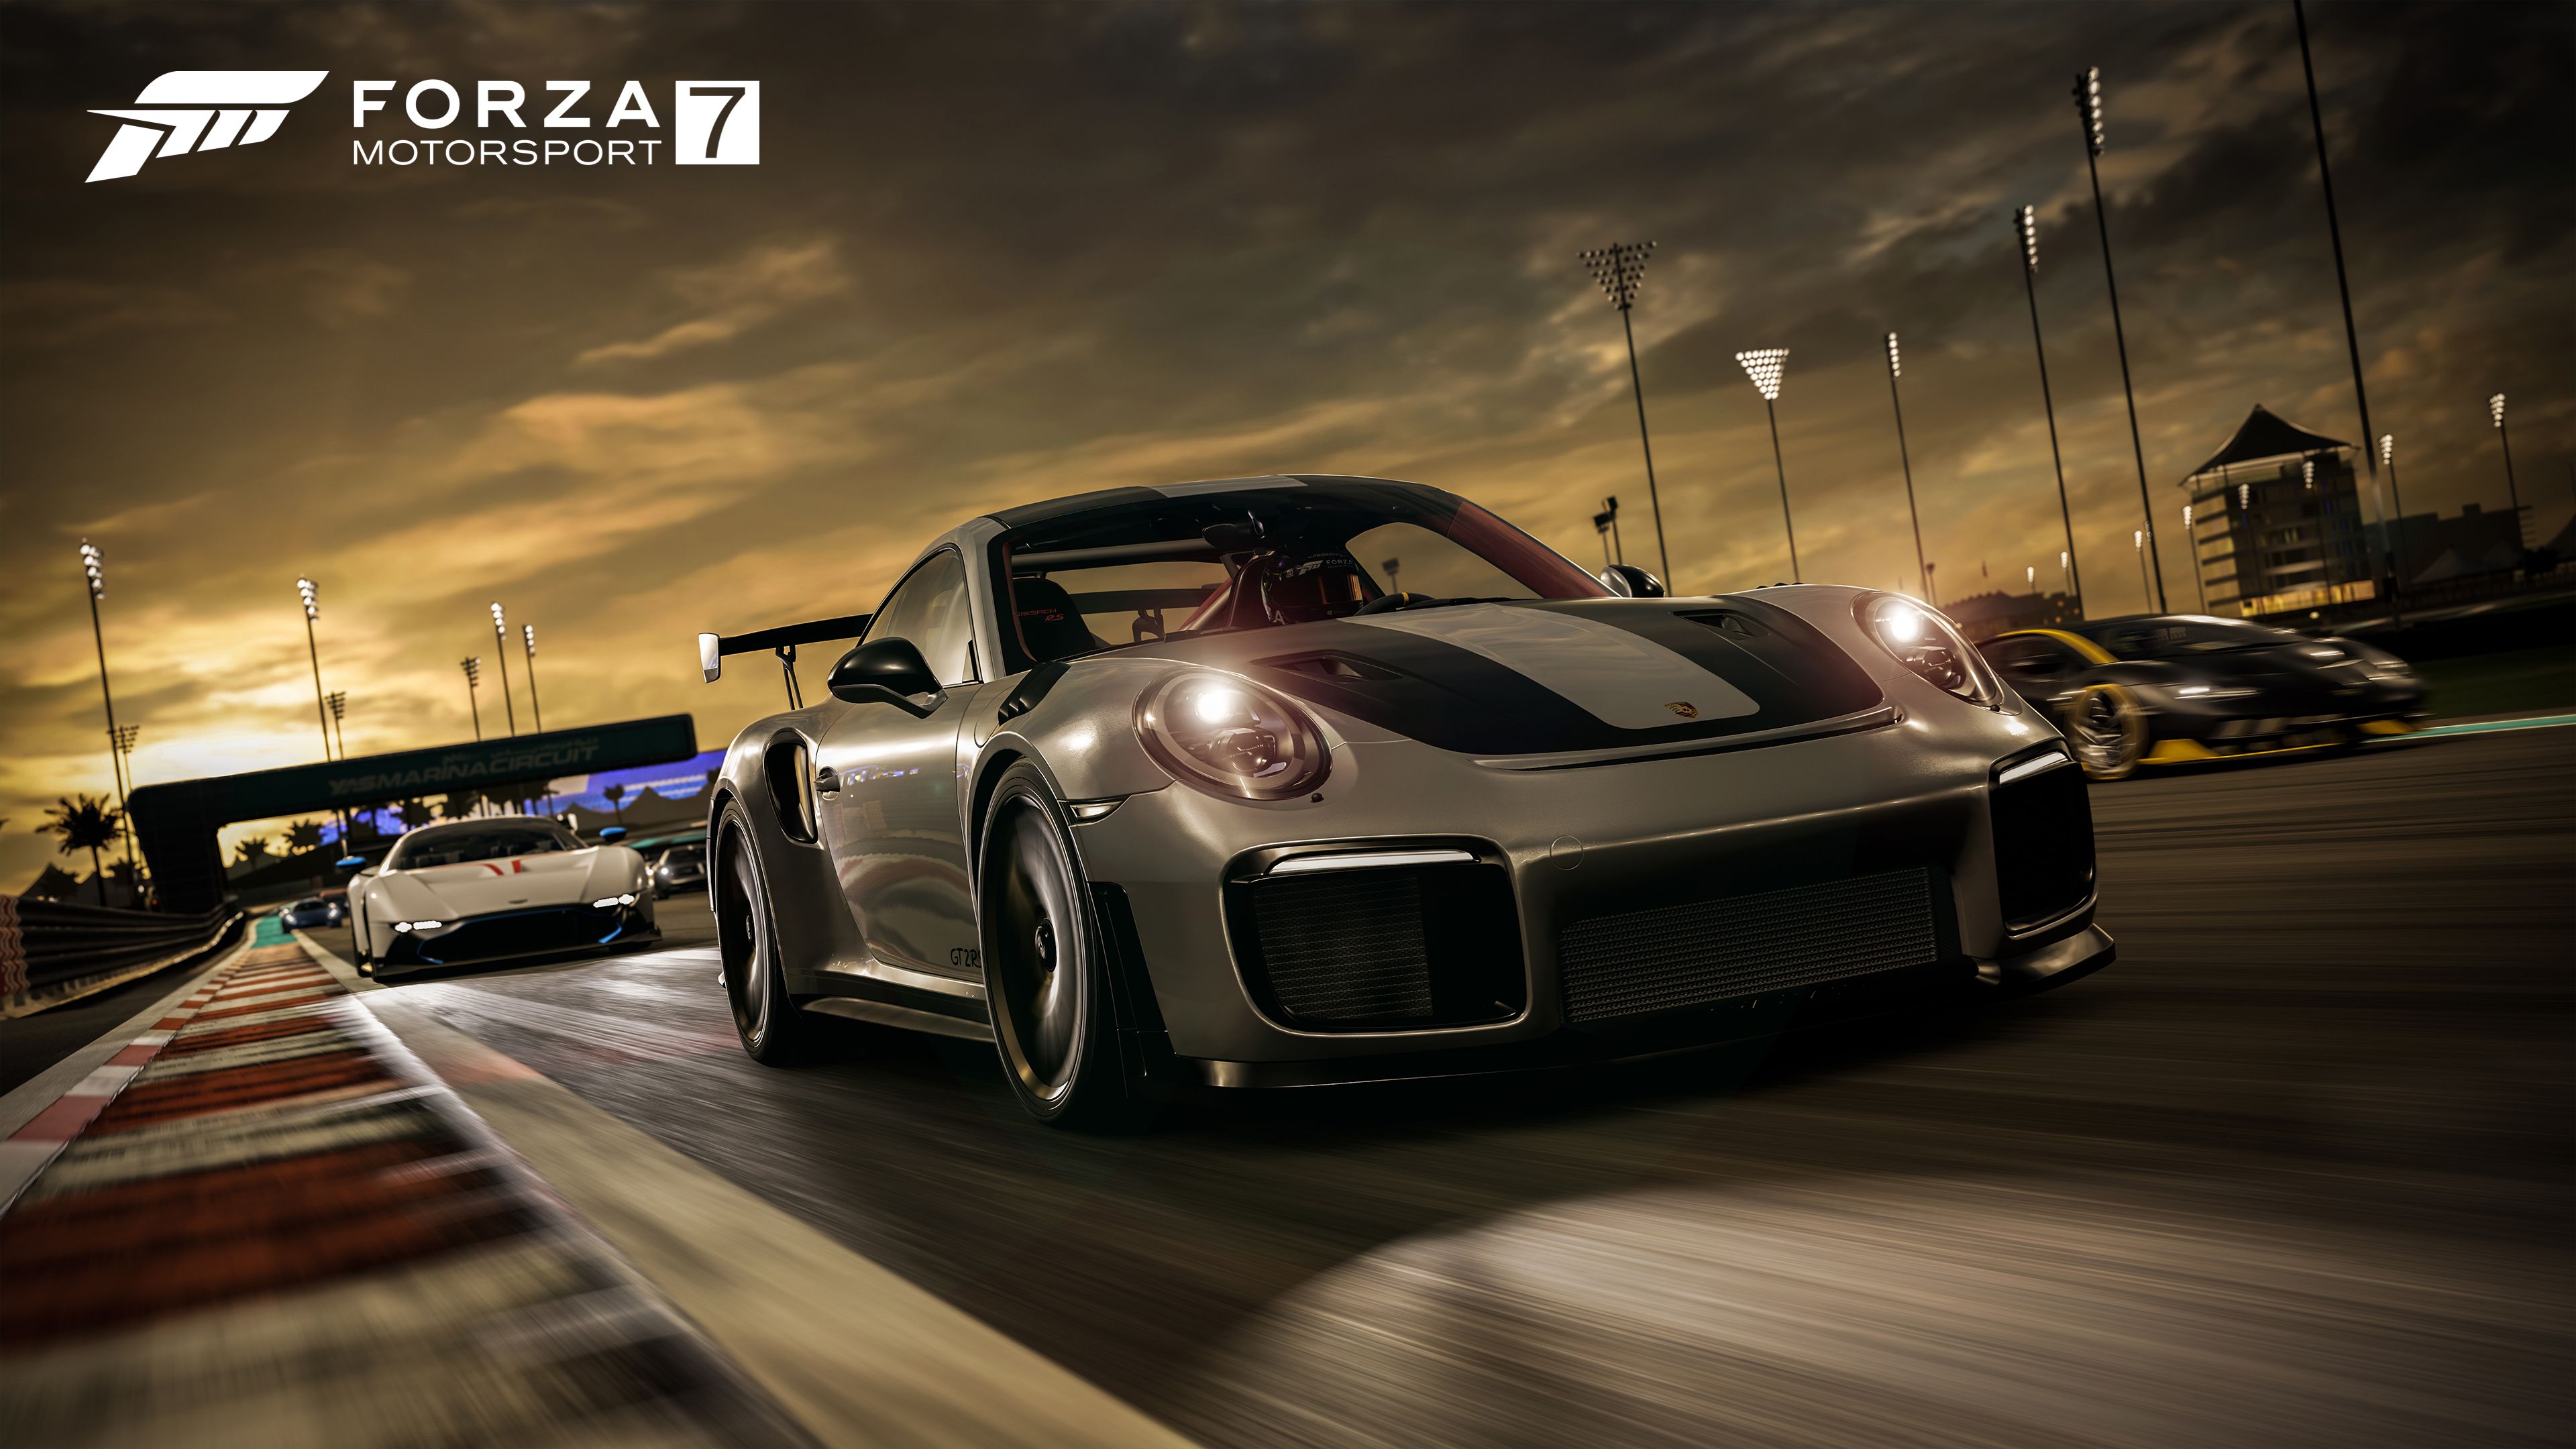 voice Blot Trivial Forza Motorsport 7 Review - New Forza Racing Game Review